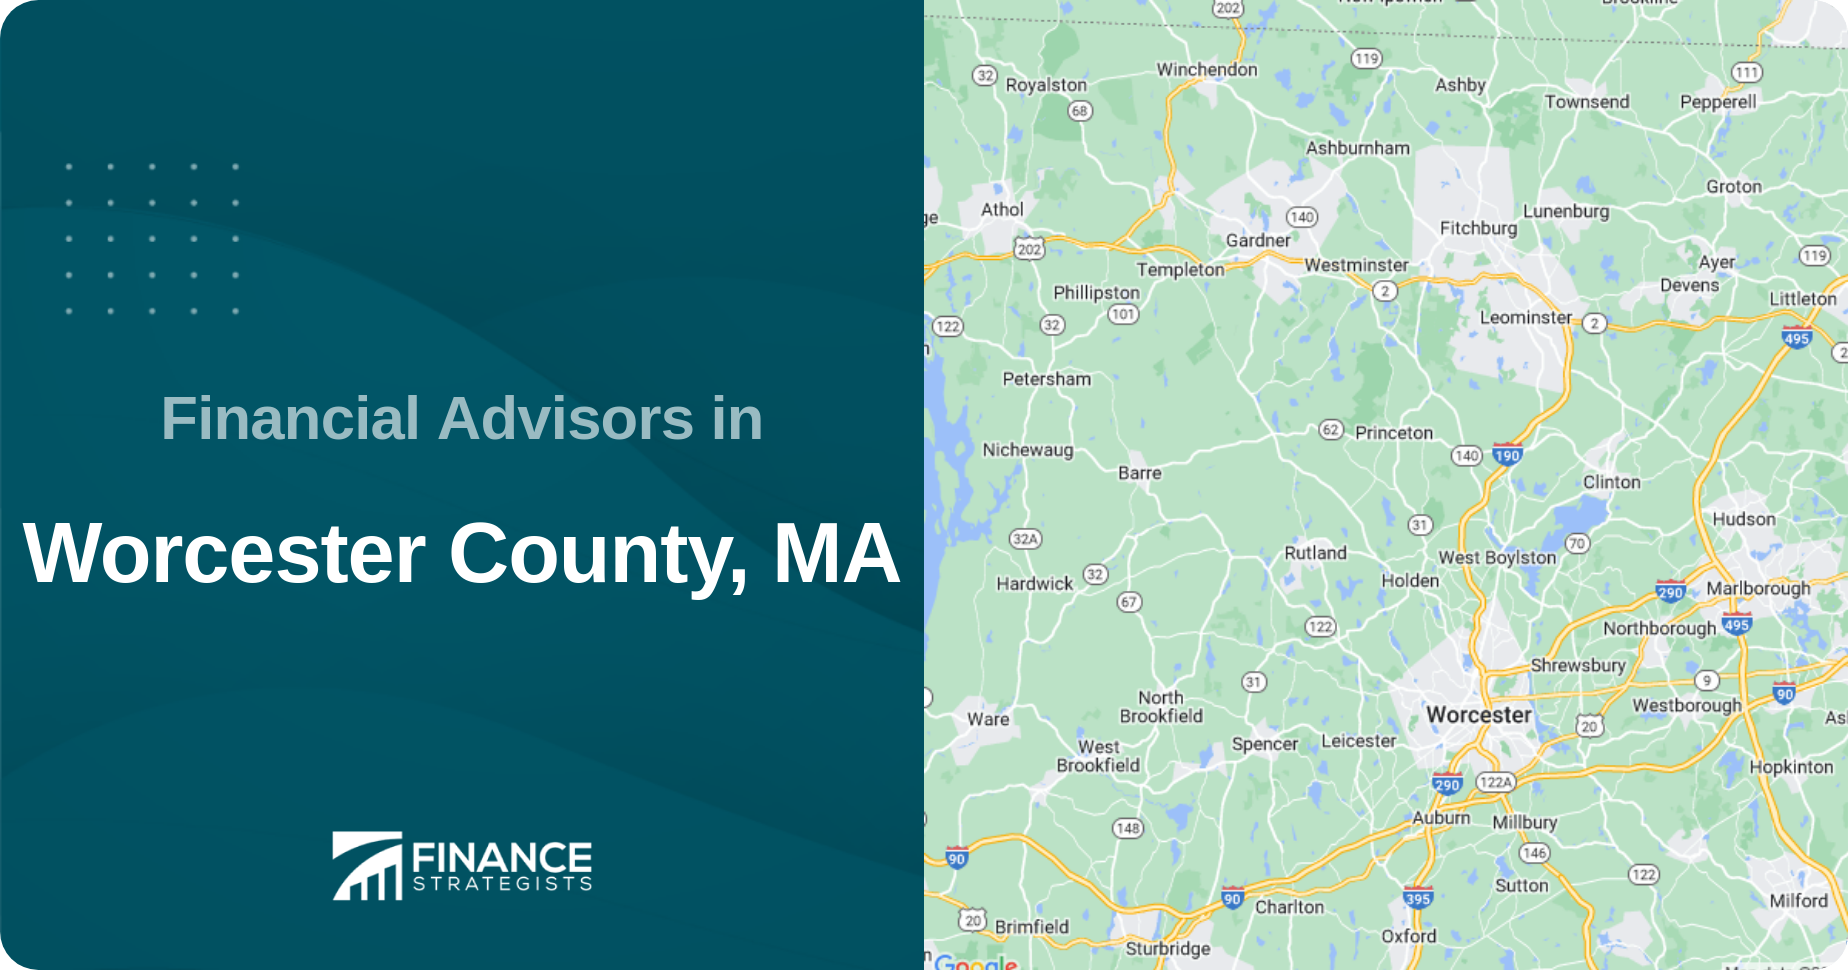 Financial Advisors in Worcester County, MA